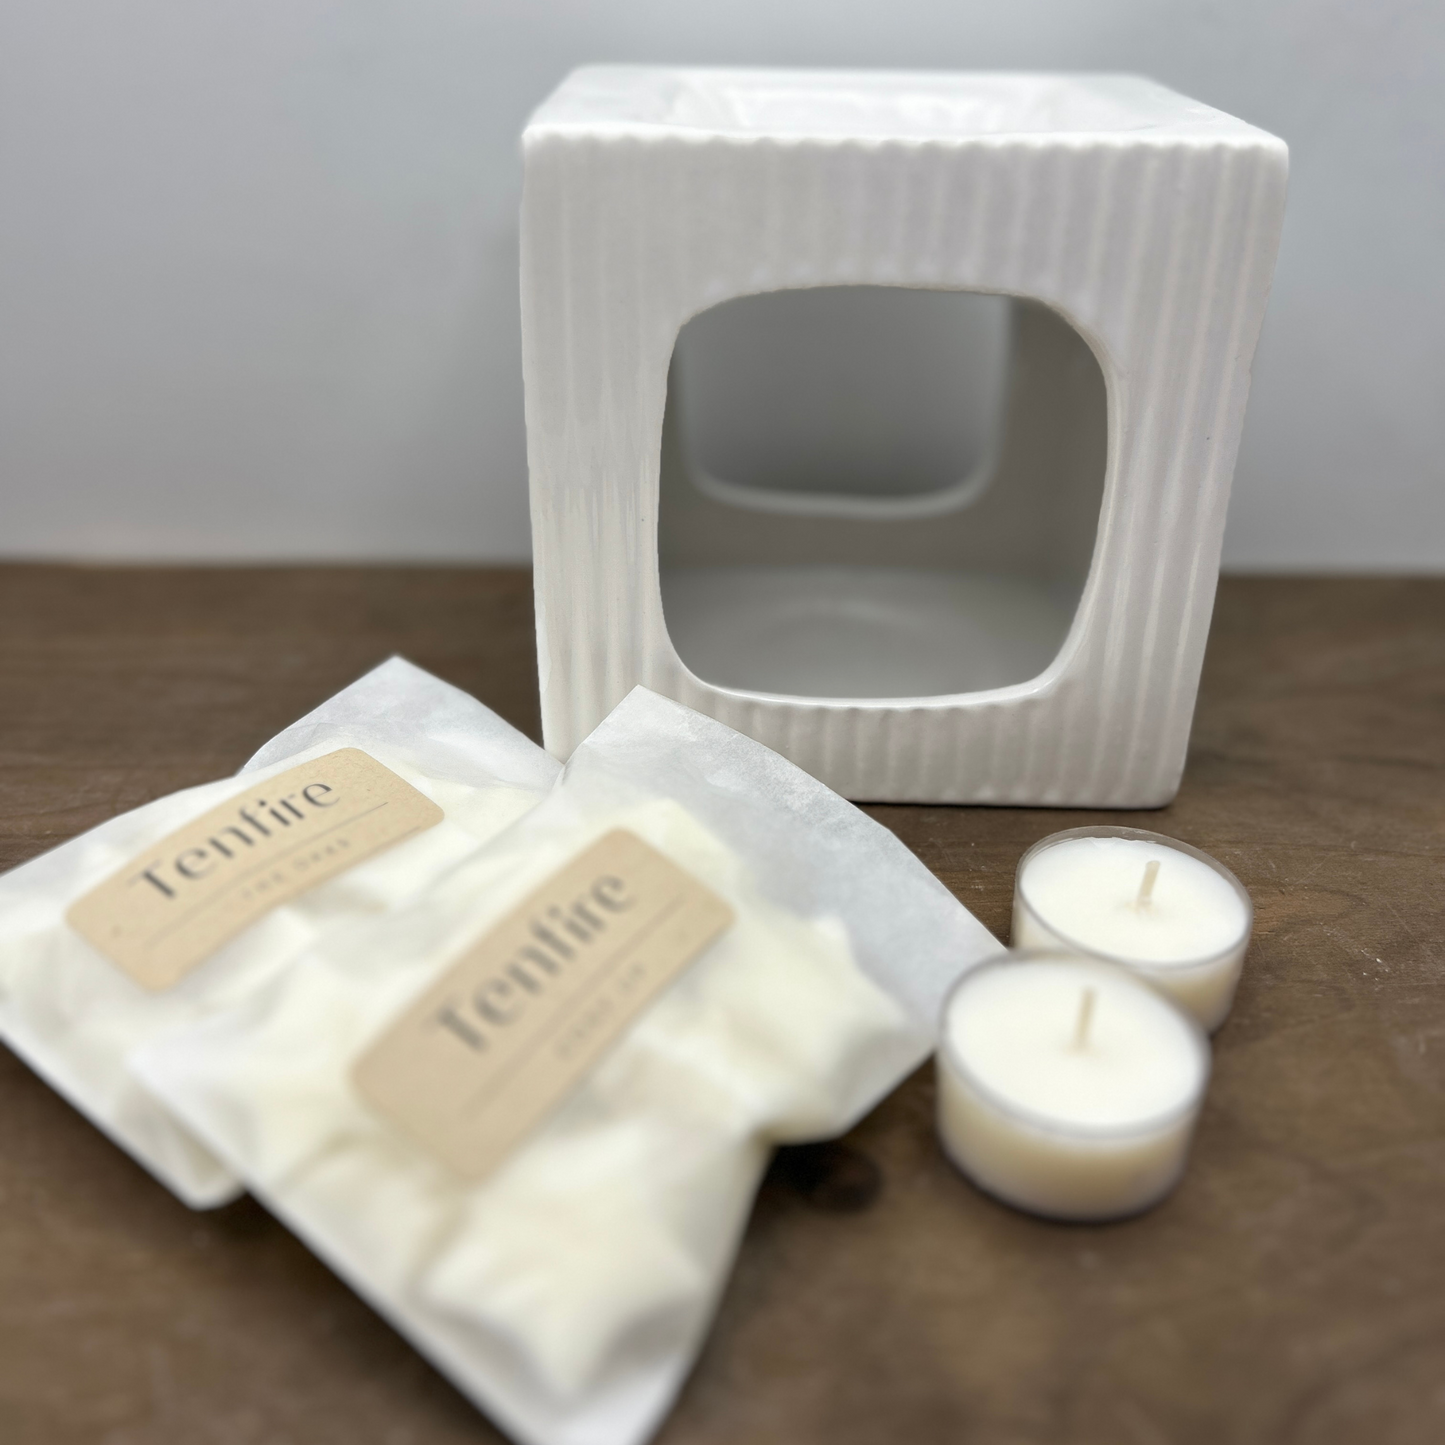 Square ribbed wax melt burner with two bags of wax melts and two tealights